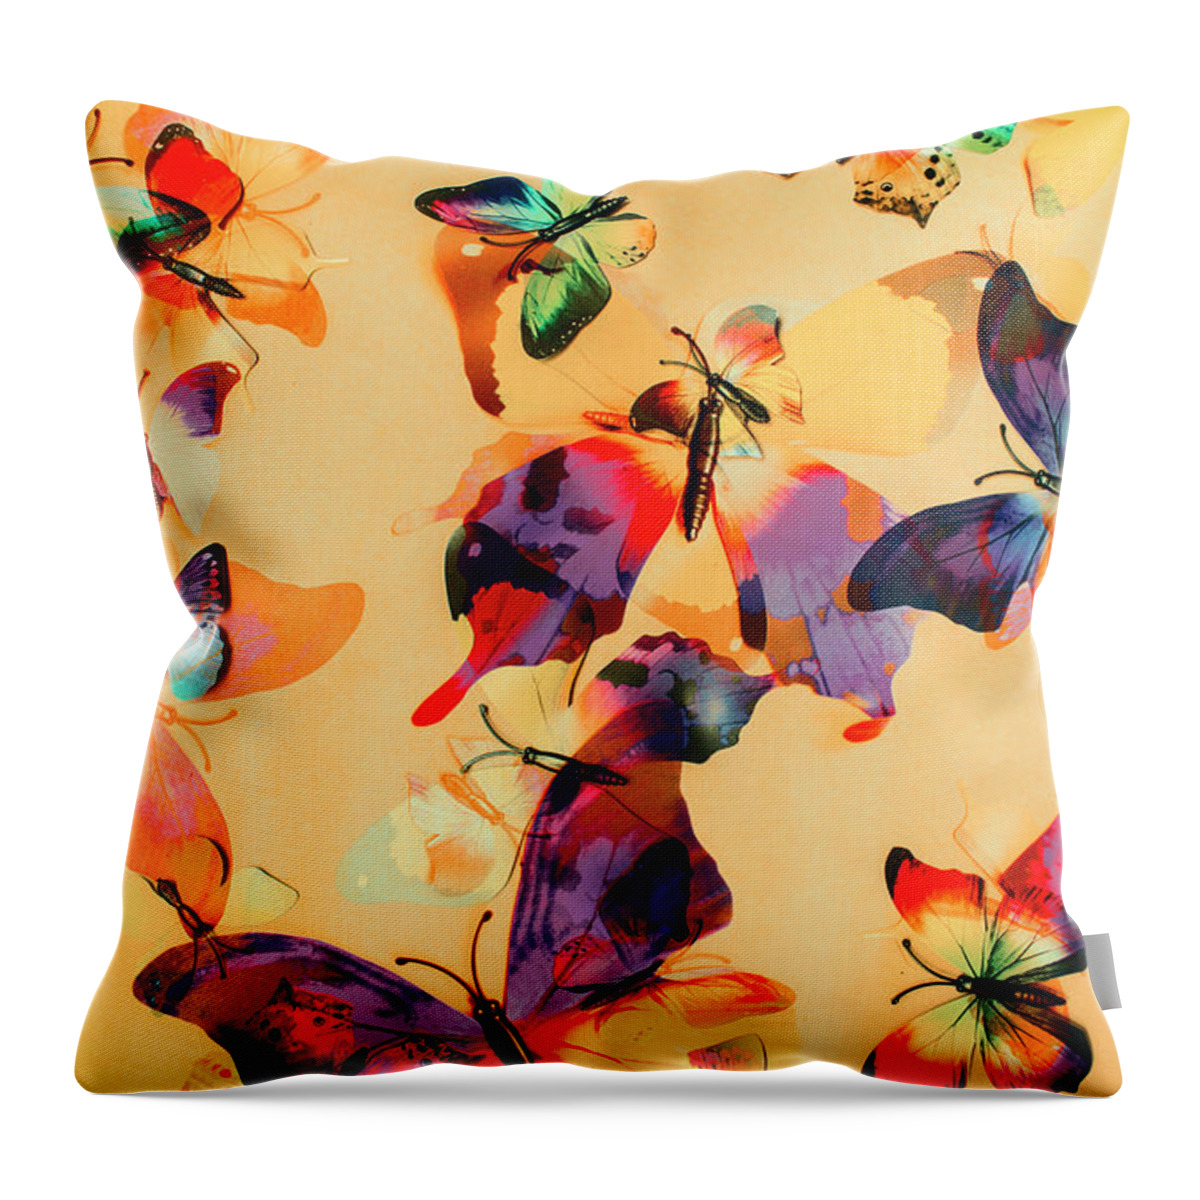 Background Throw Pillow featuring the photograph Group of Butterflies with Colorful Wings by Jorgo Photography